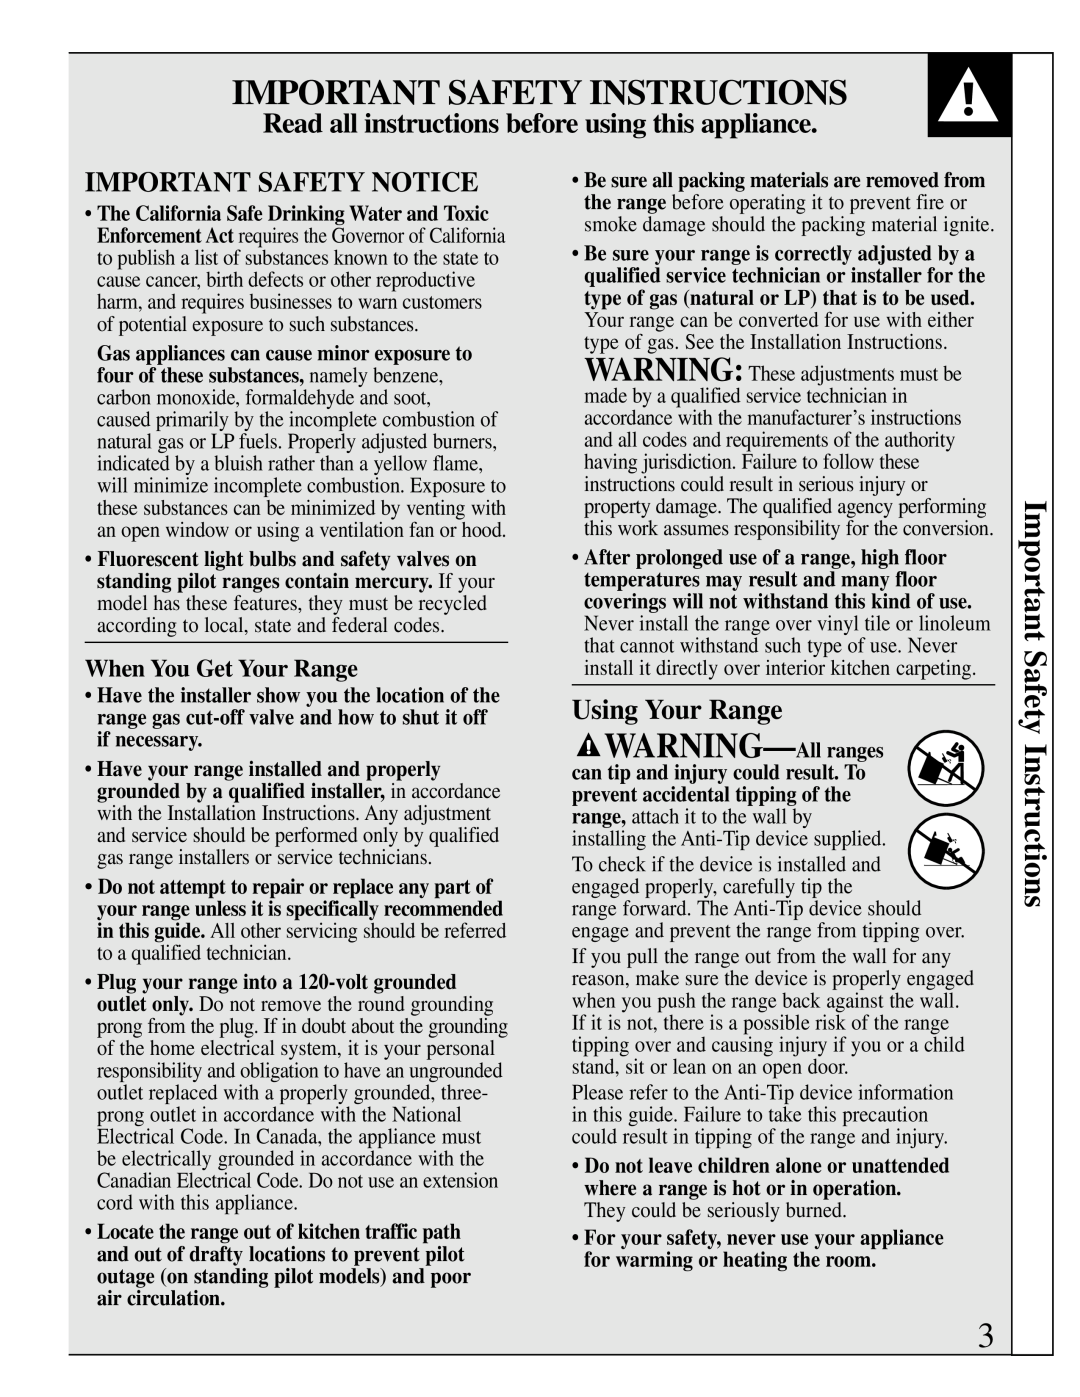 GE EGR3001 manual Important Safety Instructions, Read all instructions before using this appliance, Important Safety Notice 